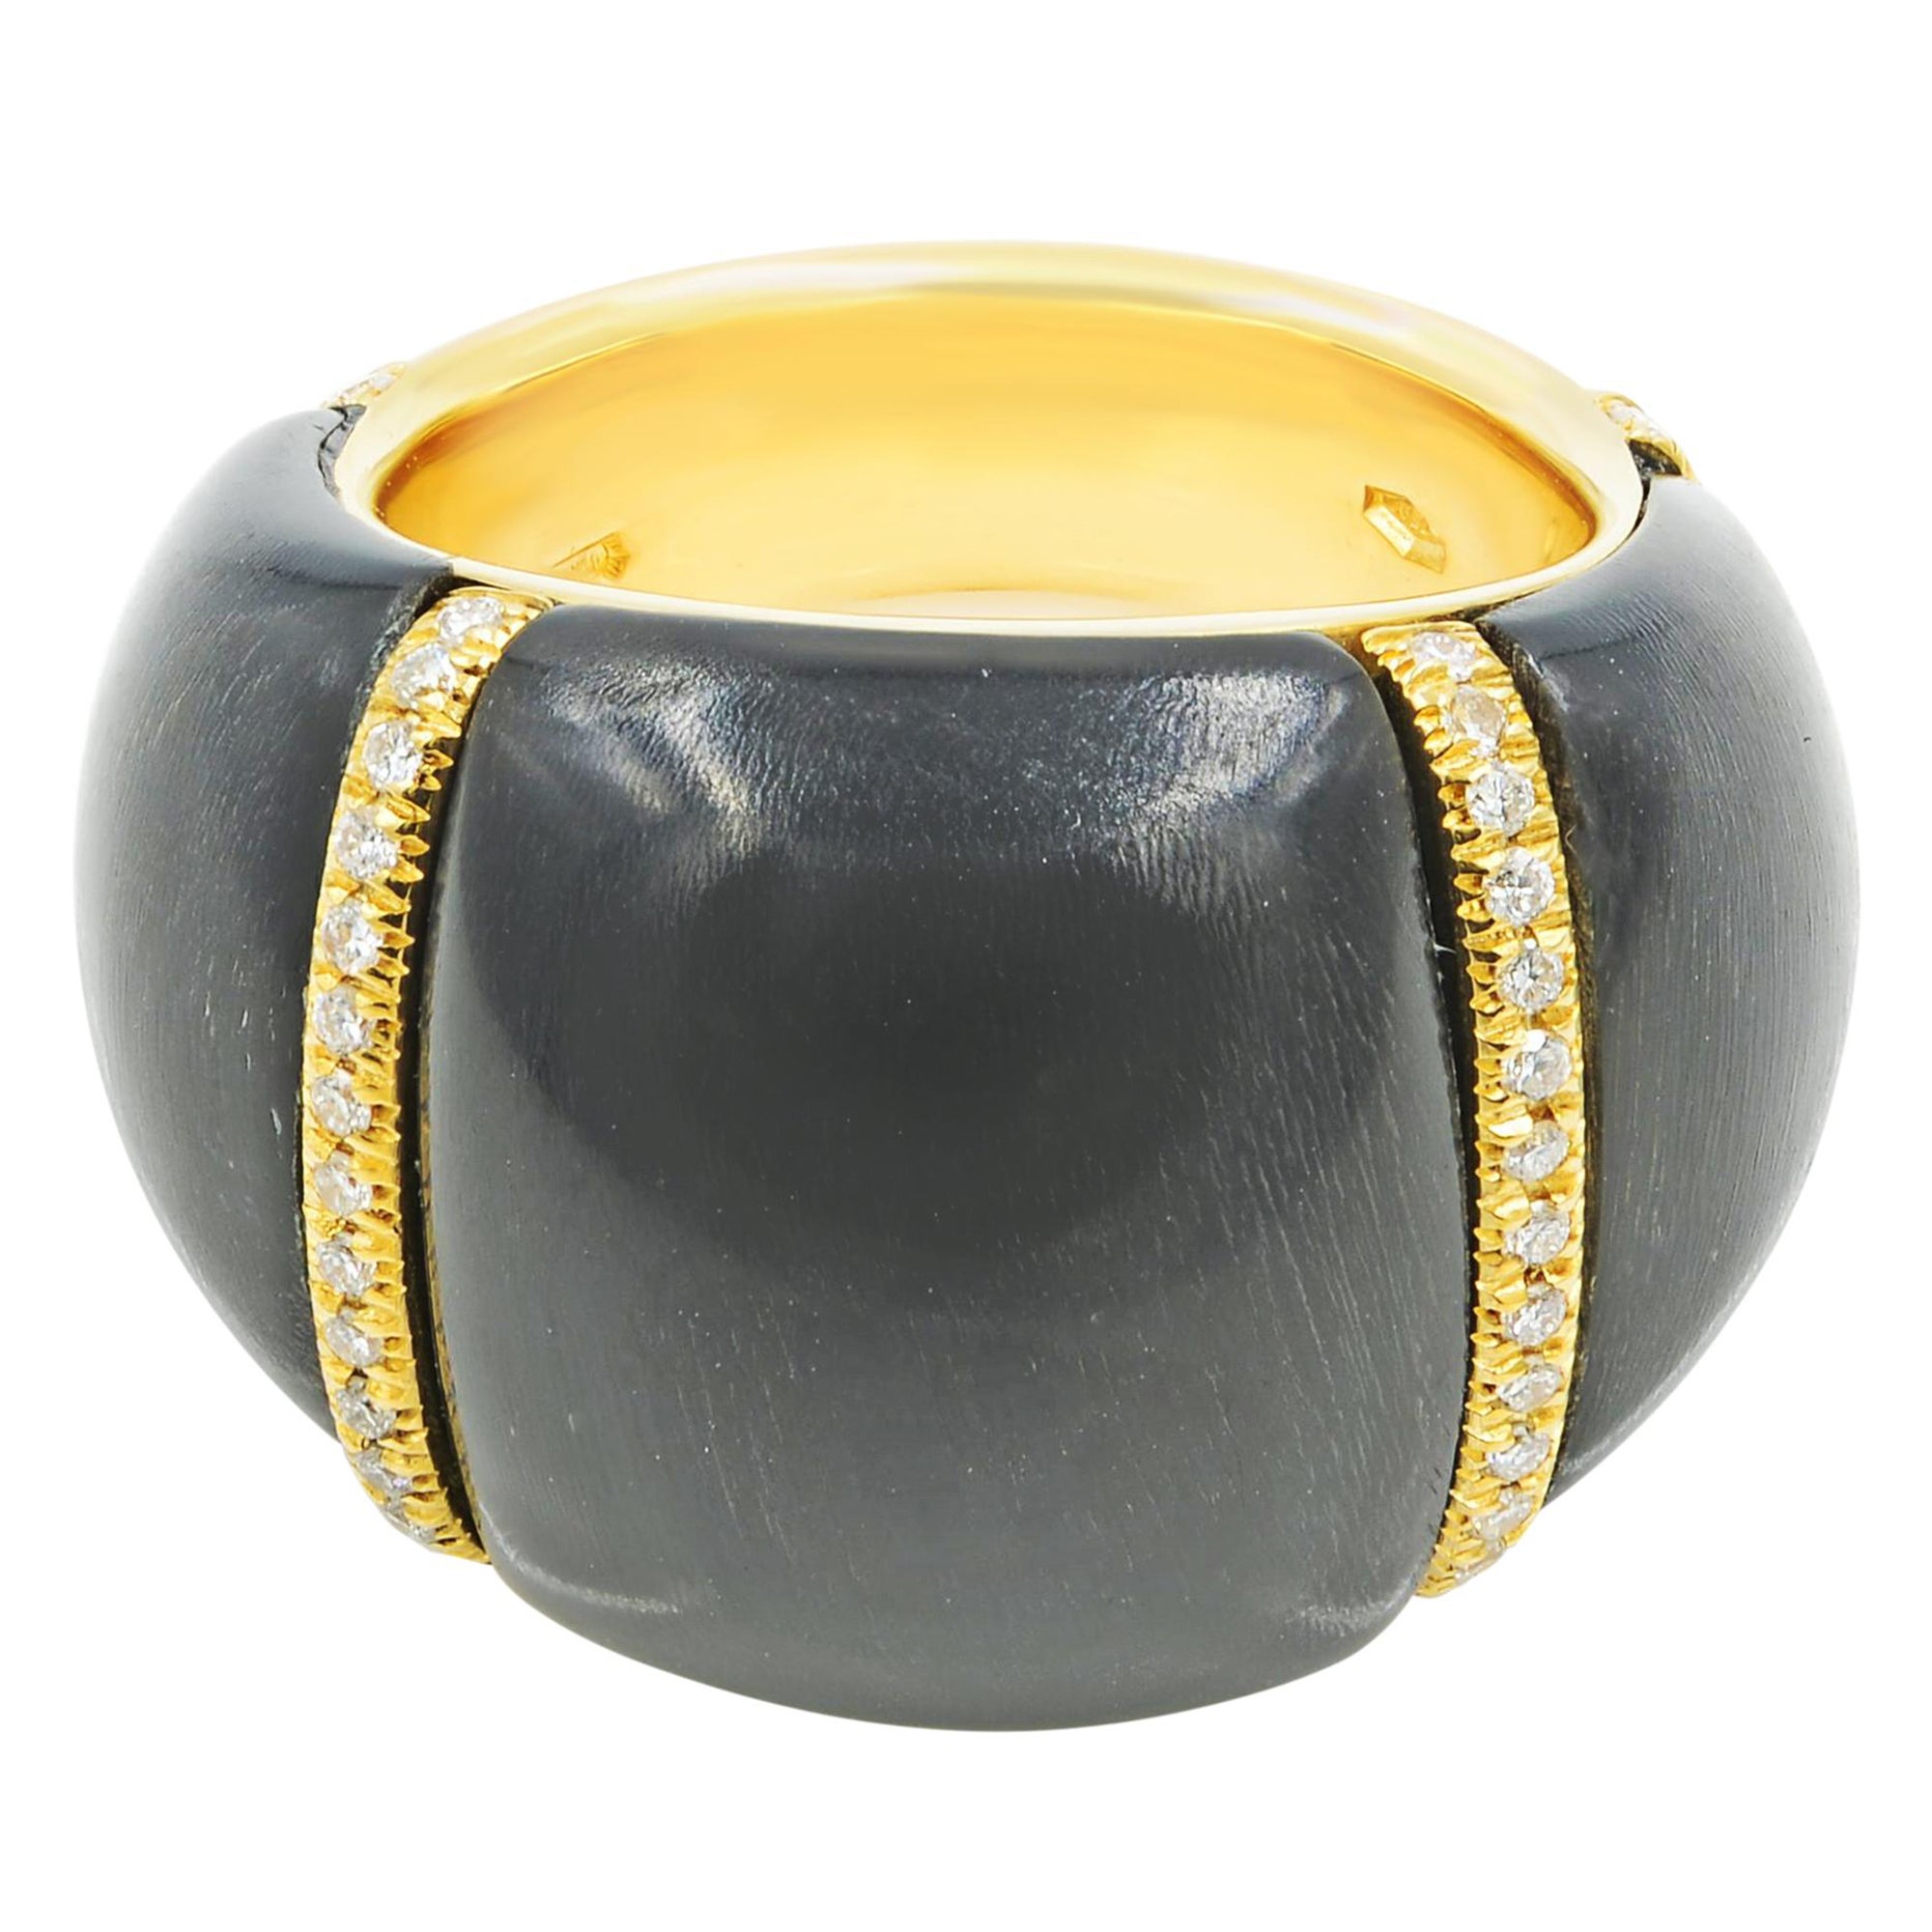 Chantecler Black Onyx Diamond Dome Shaped Ring 18k Yellow Gold 0.50cttw Size 6.5 For Sale